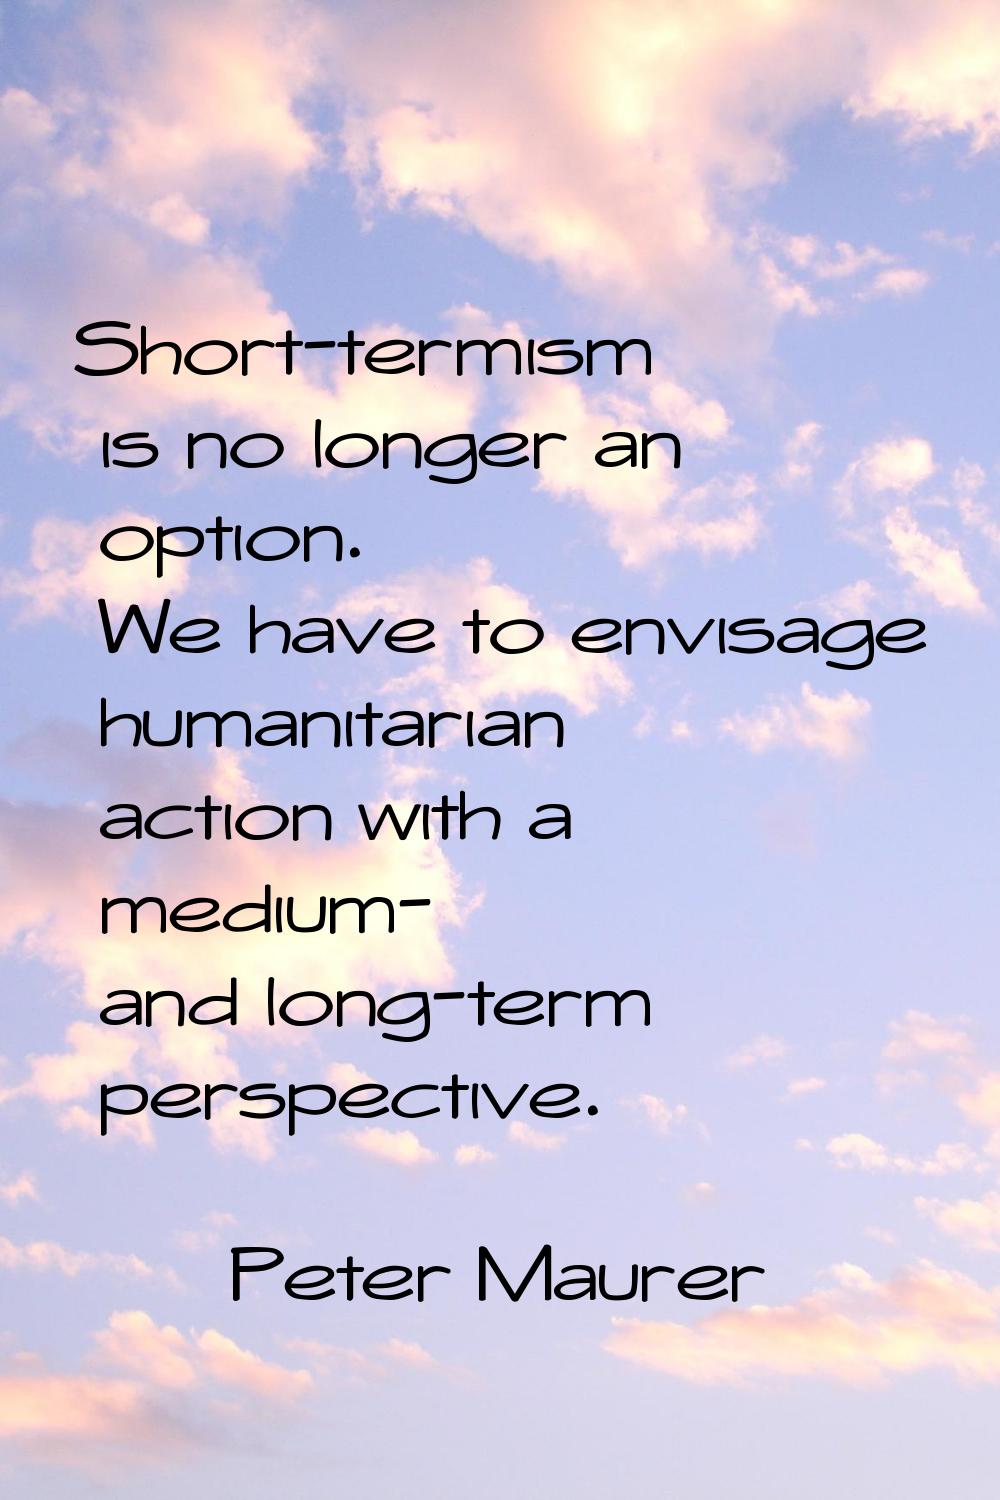 Short-termism is no longer an option. We have to envisage humanitarian action with a medium- and lo